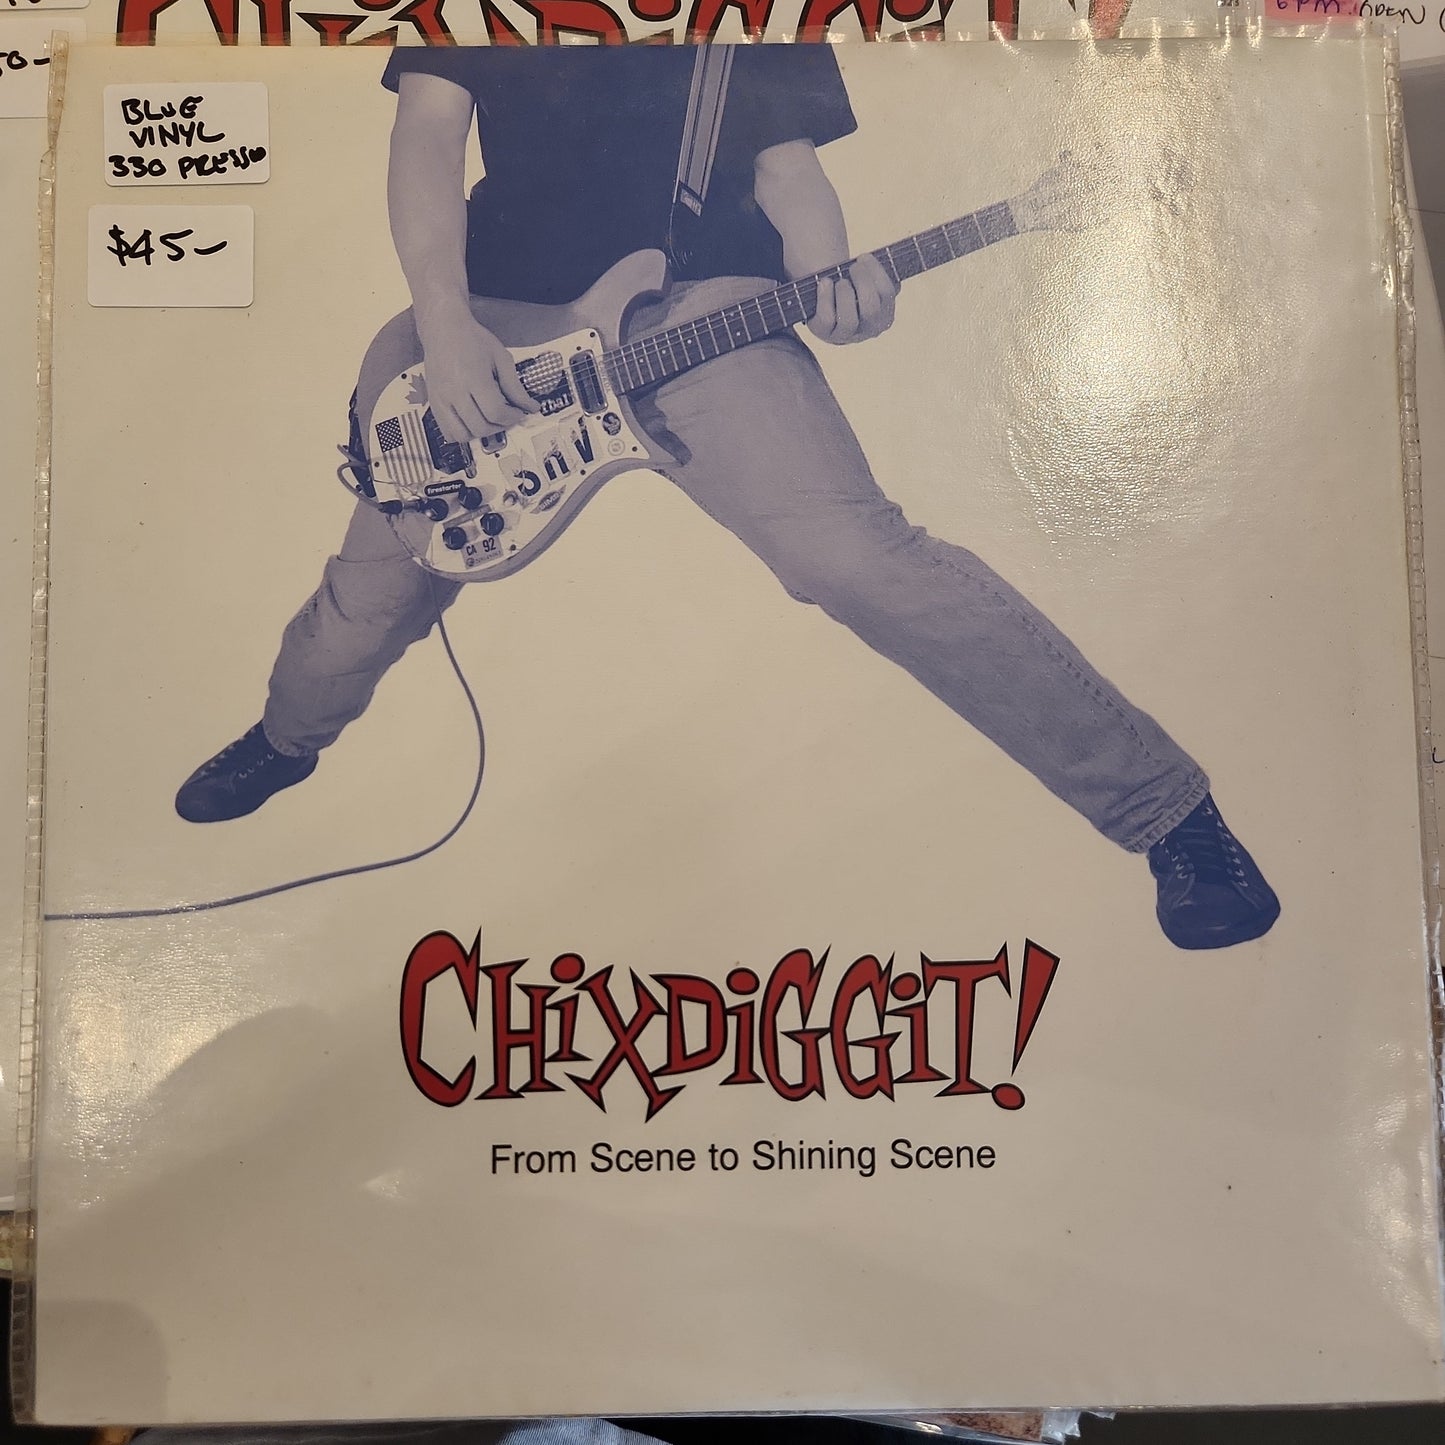 Chixdiggit - From Scene to Shining Scene - Used Limited Edition Colour Vinyl LP